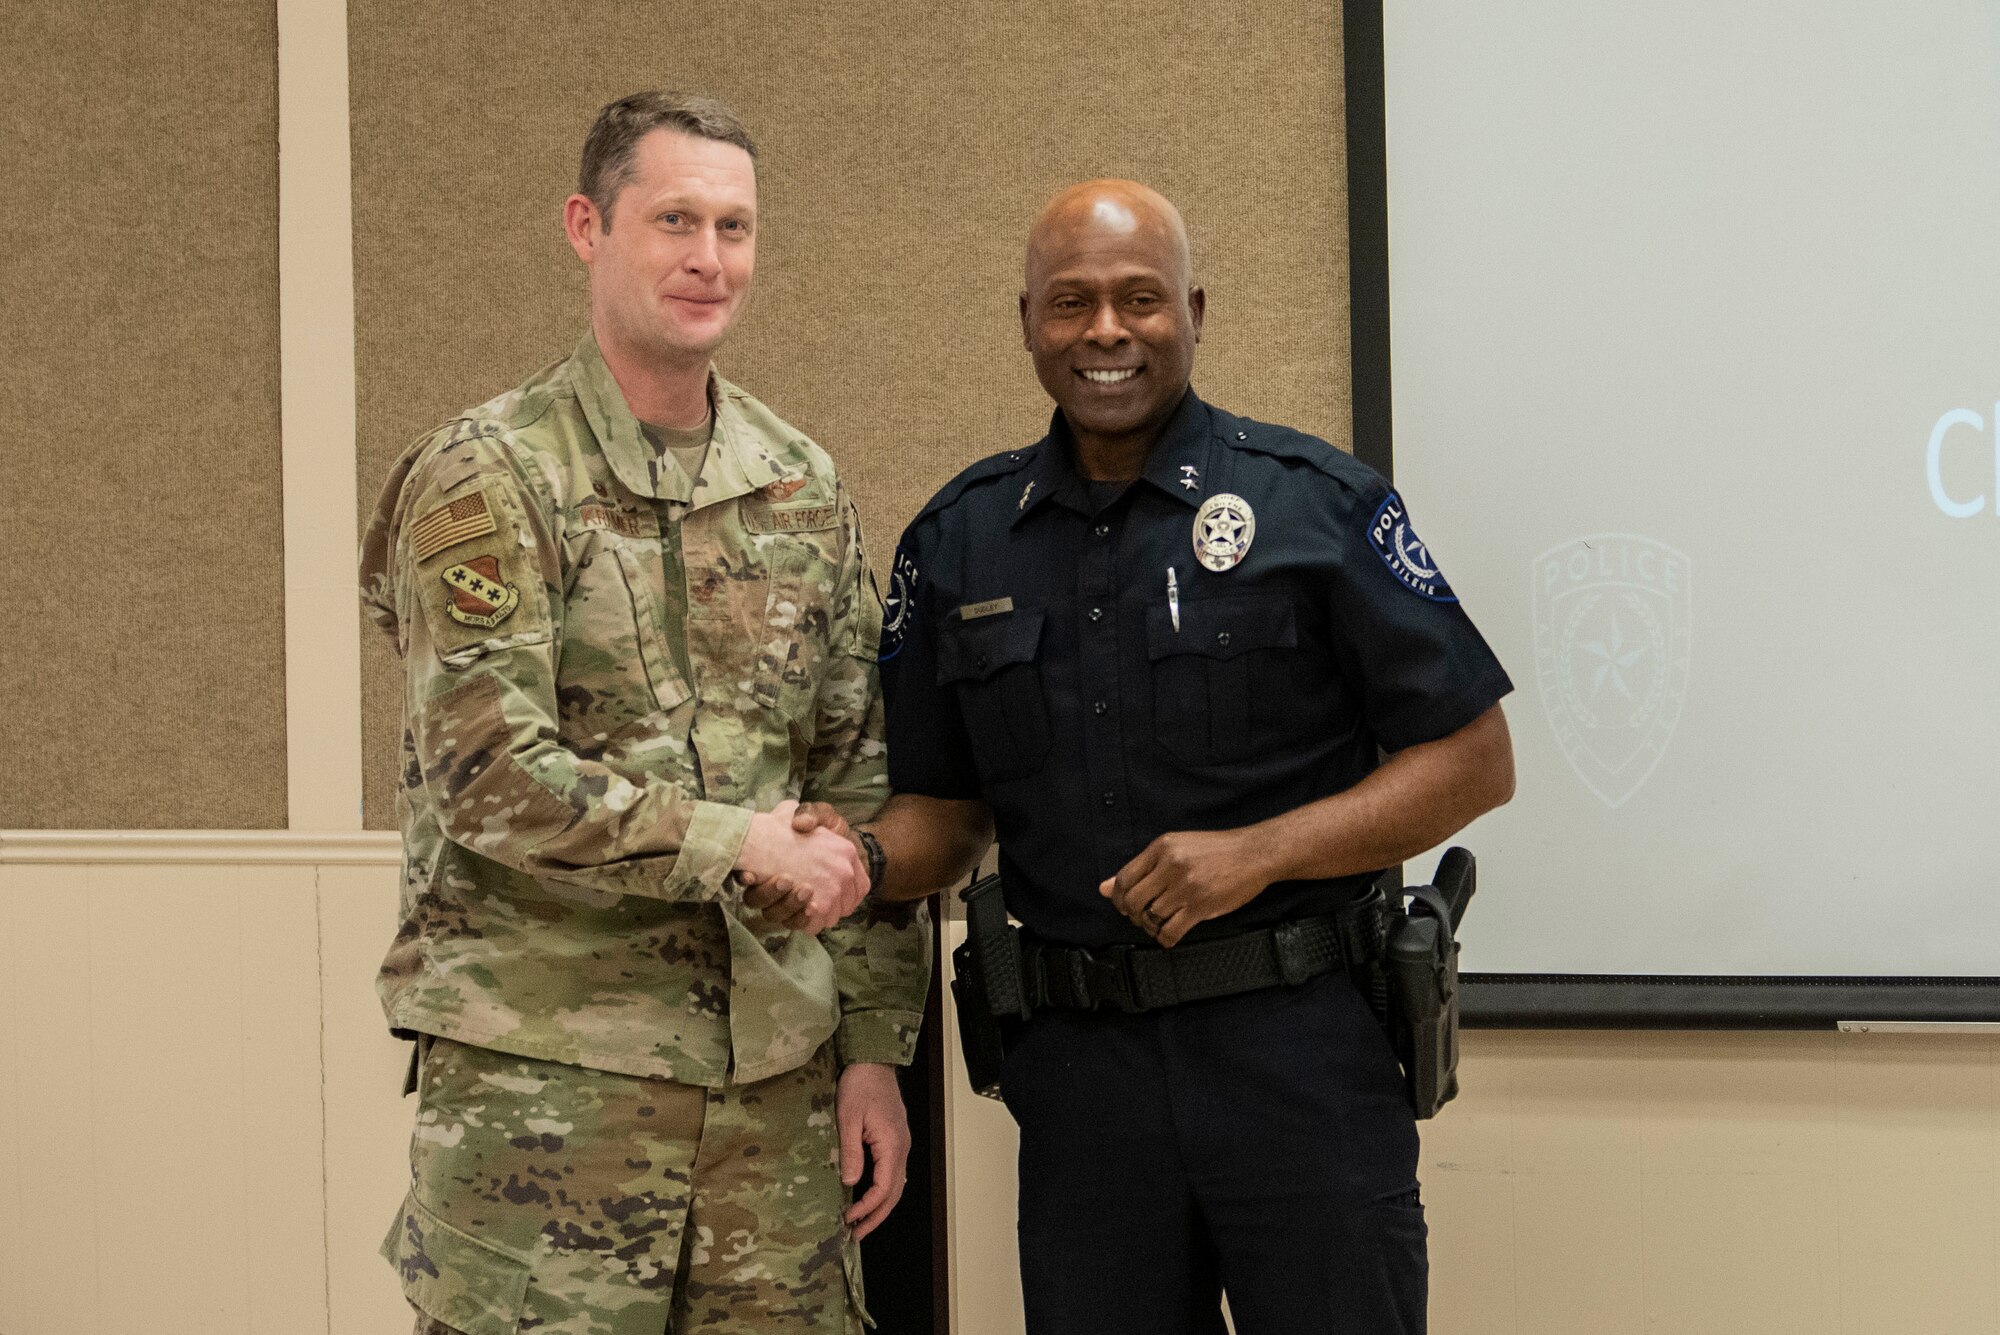 Col. Joseph Kramer, 7th Bomb Wing commander, left, shakes hands with Marcus Dudley, Abilene Chief of Police, during the Black History Month Luncheon at Dyess Air Force Base, Texas, Feb. 22, 2022. Following Dudley’s speech, Kramer thanked him for his time, partnership, and for sharing his inspiring story of adversity and hope.. (U.S. Air Force photo by Airman 1st Class Ryan Hayman)